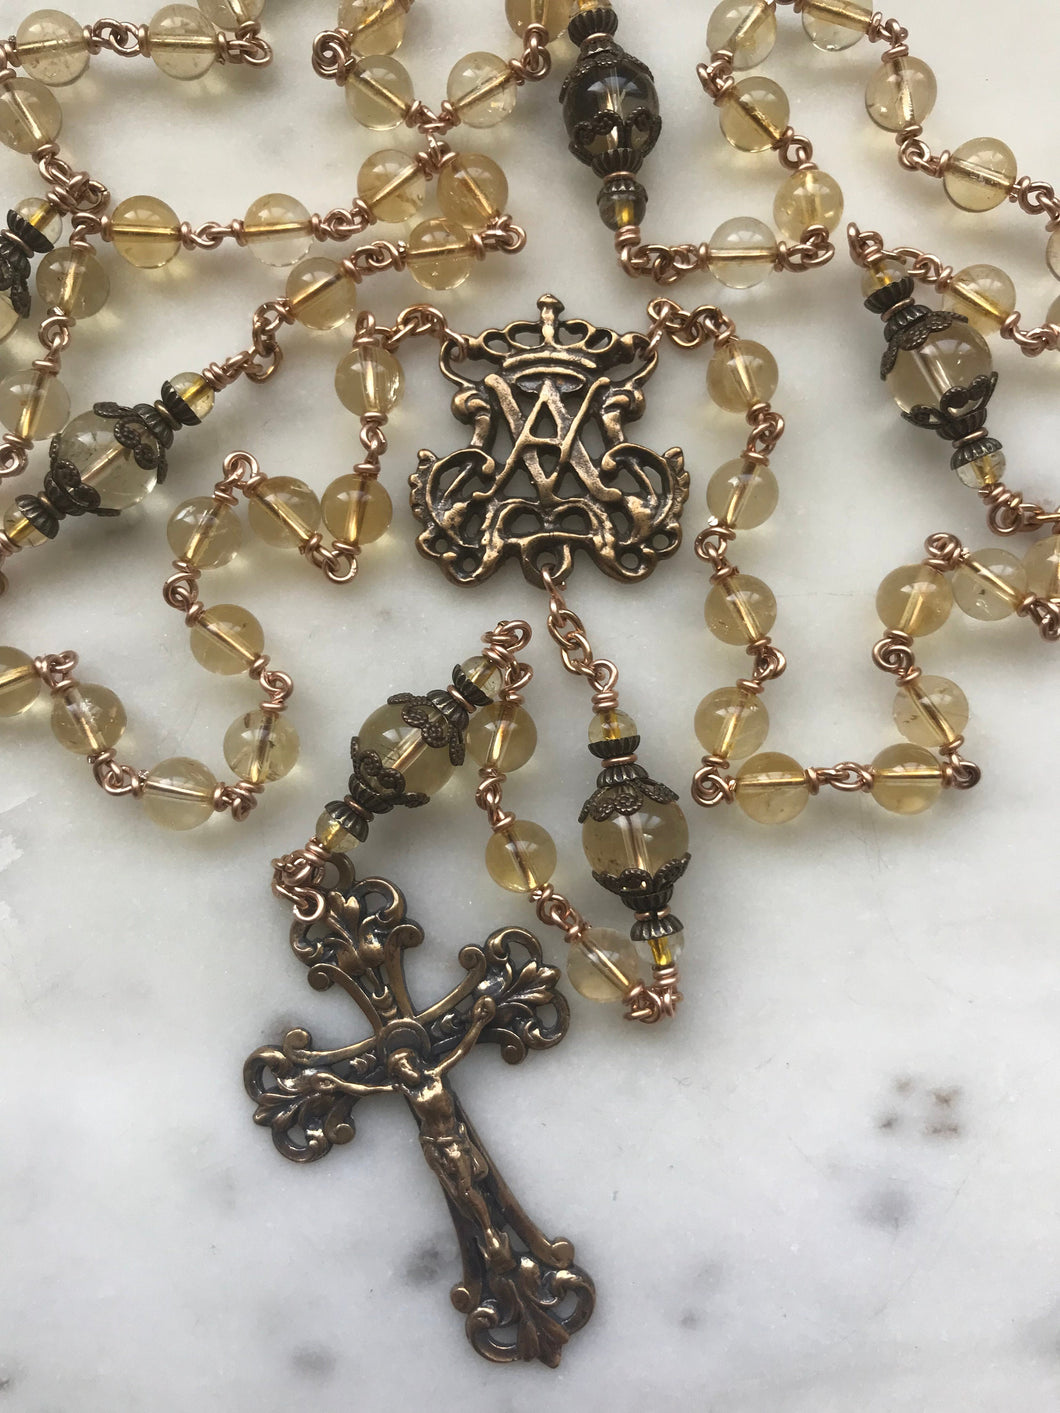 Citrine Rosary - Bronze - Gemstone - Antique Reproduction Medals - wire-wrapped CeCeAgnes